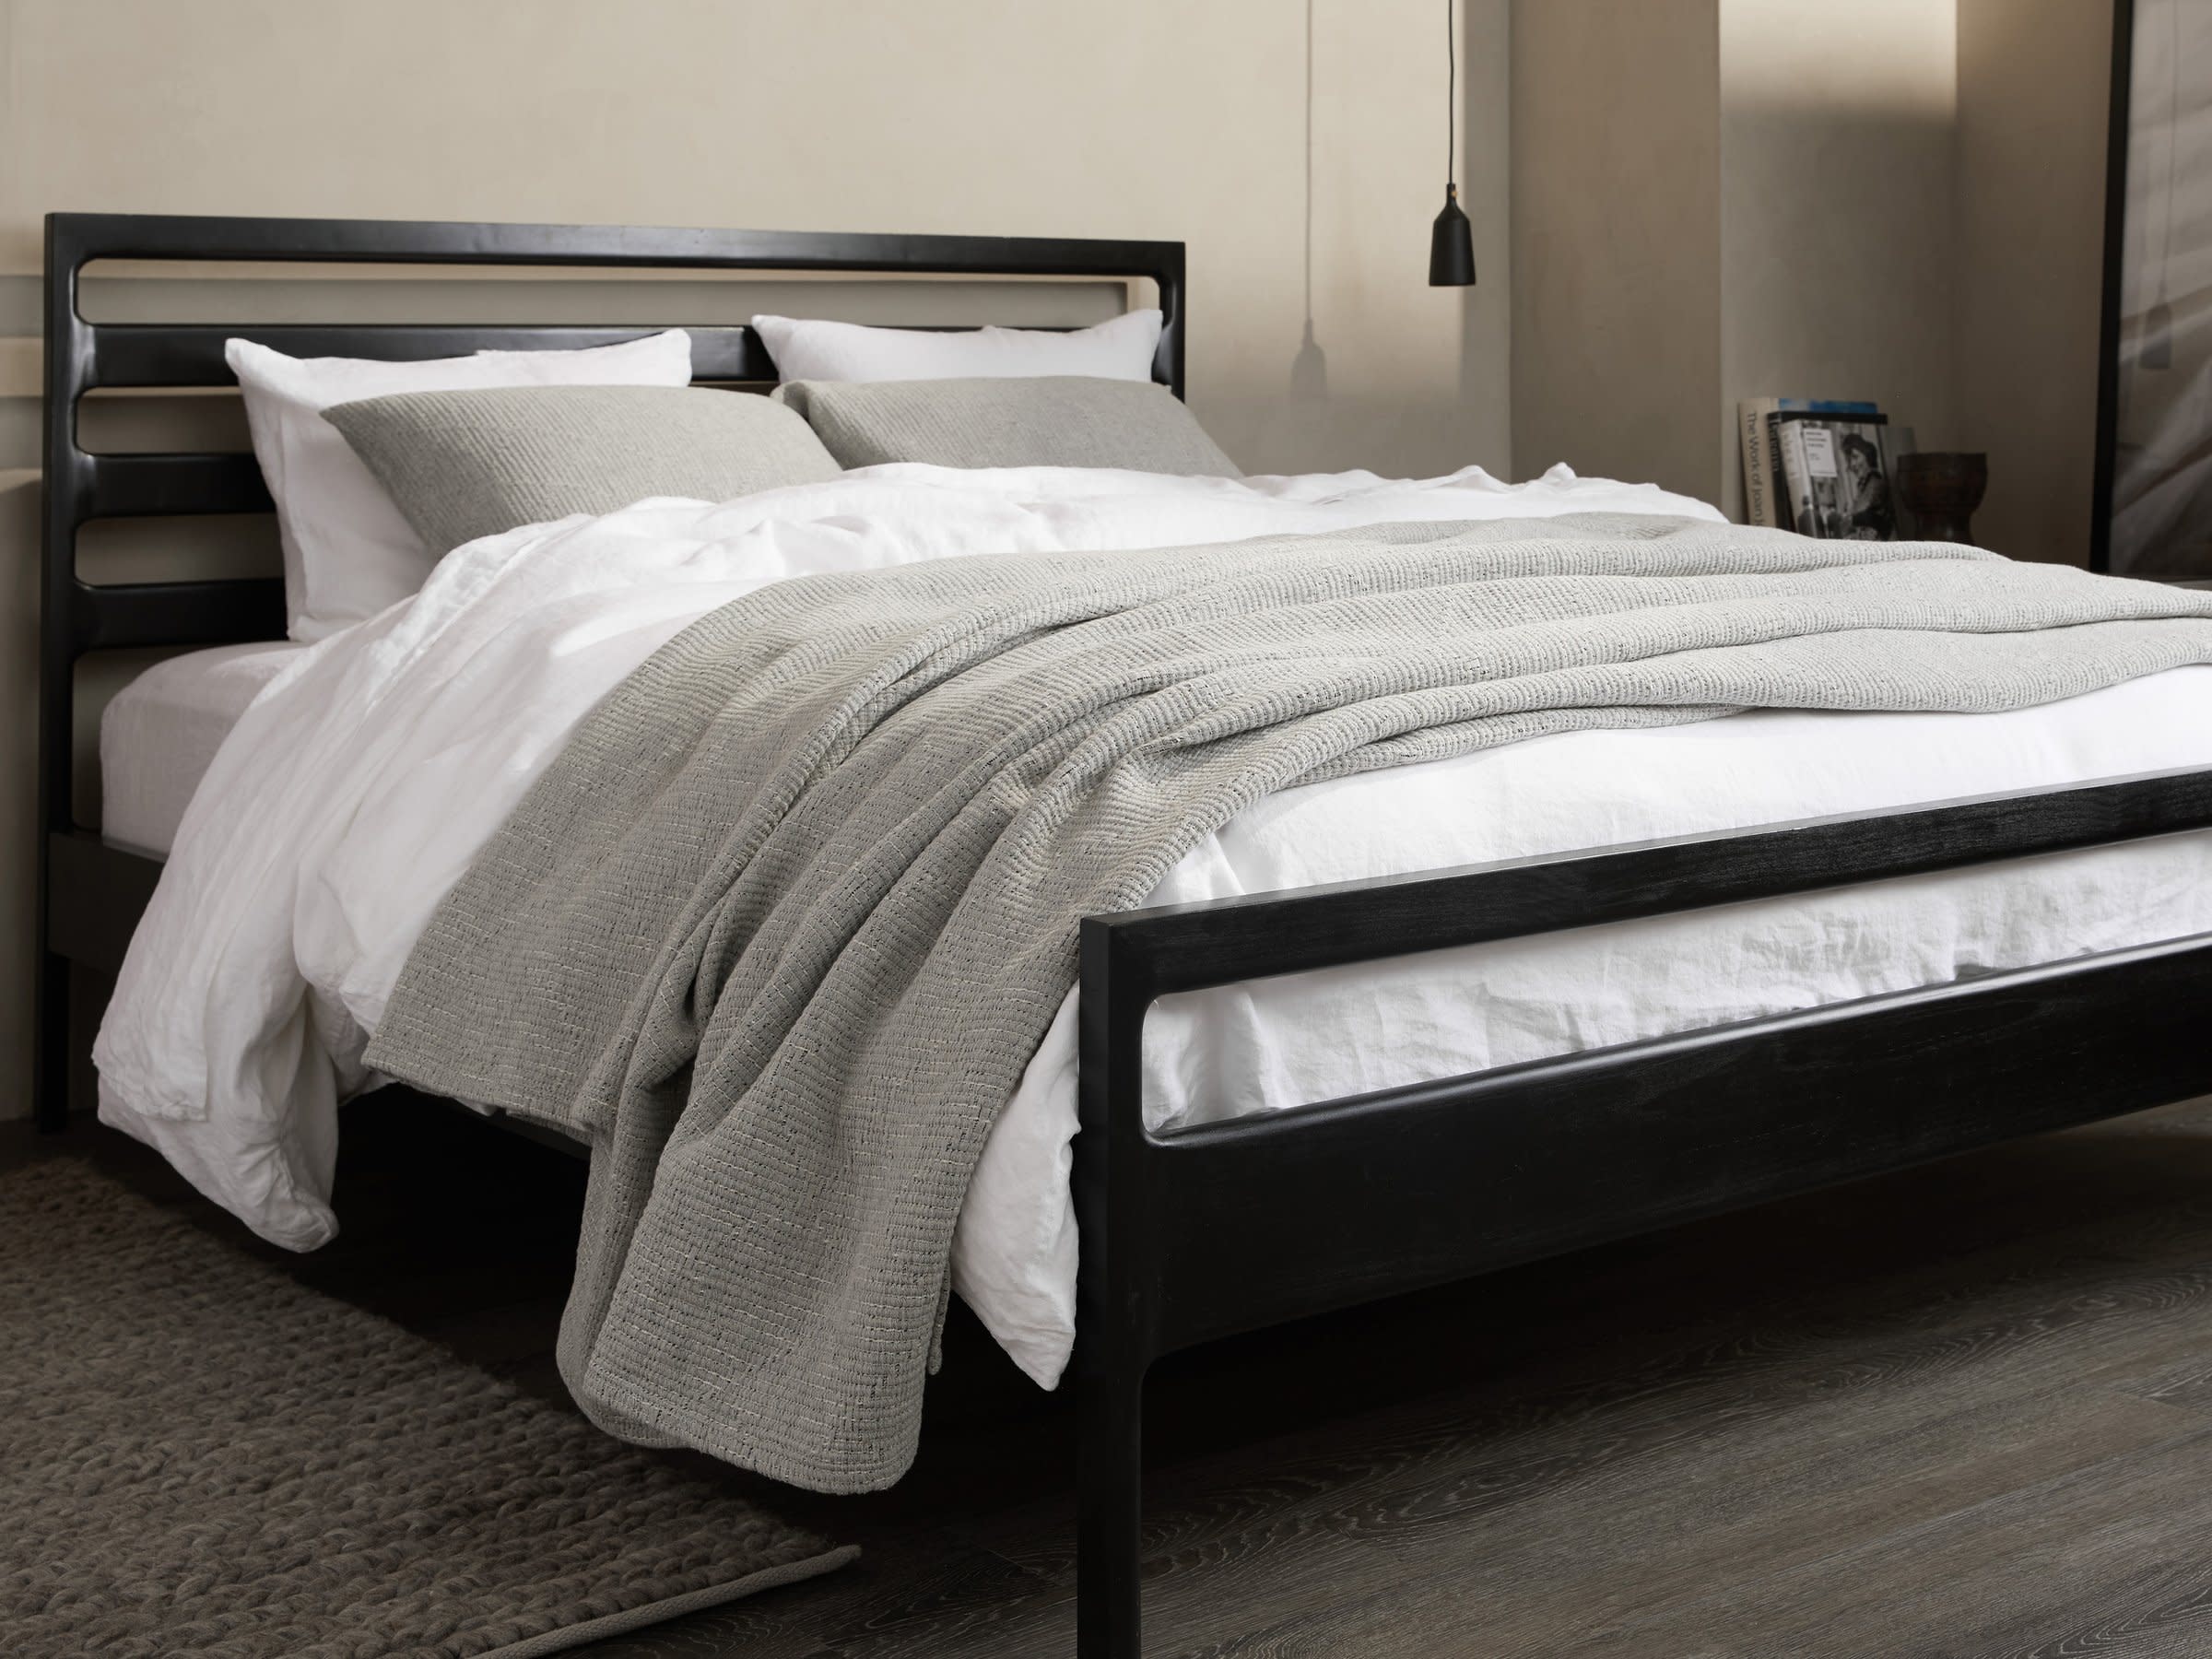 Grey And Black Linea Cotton Coverlet Shown In A Room